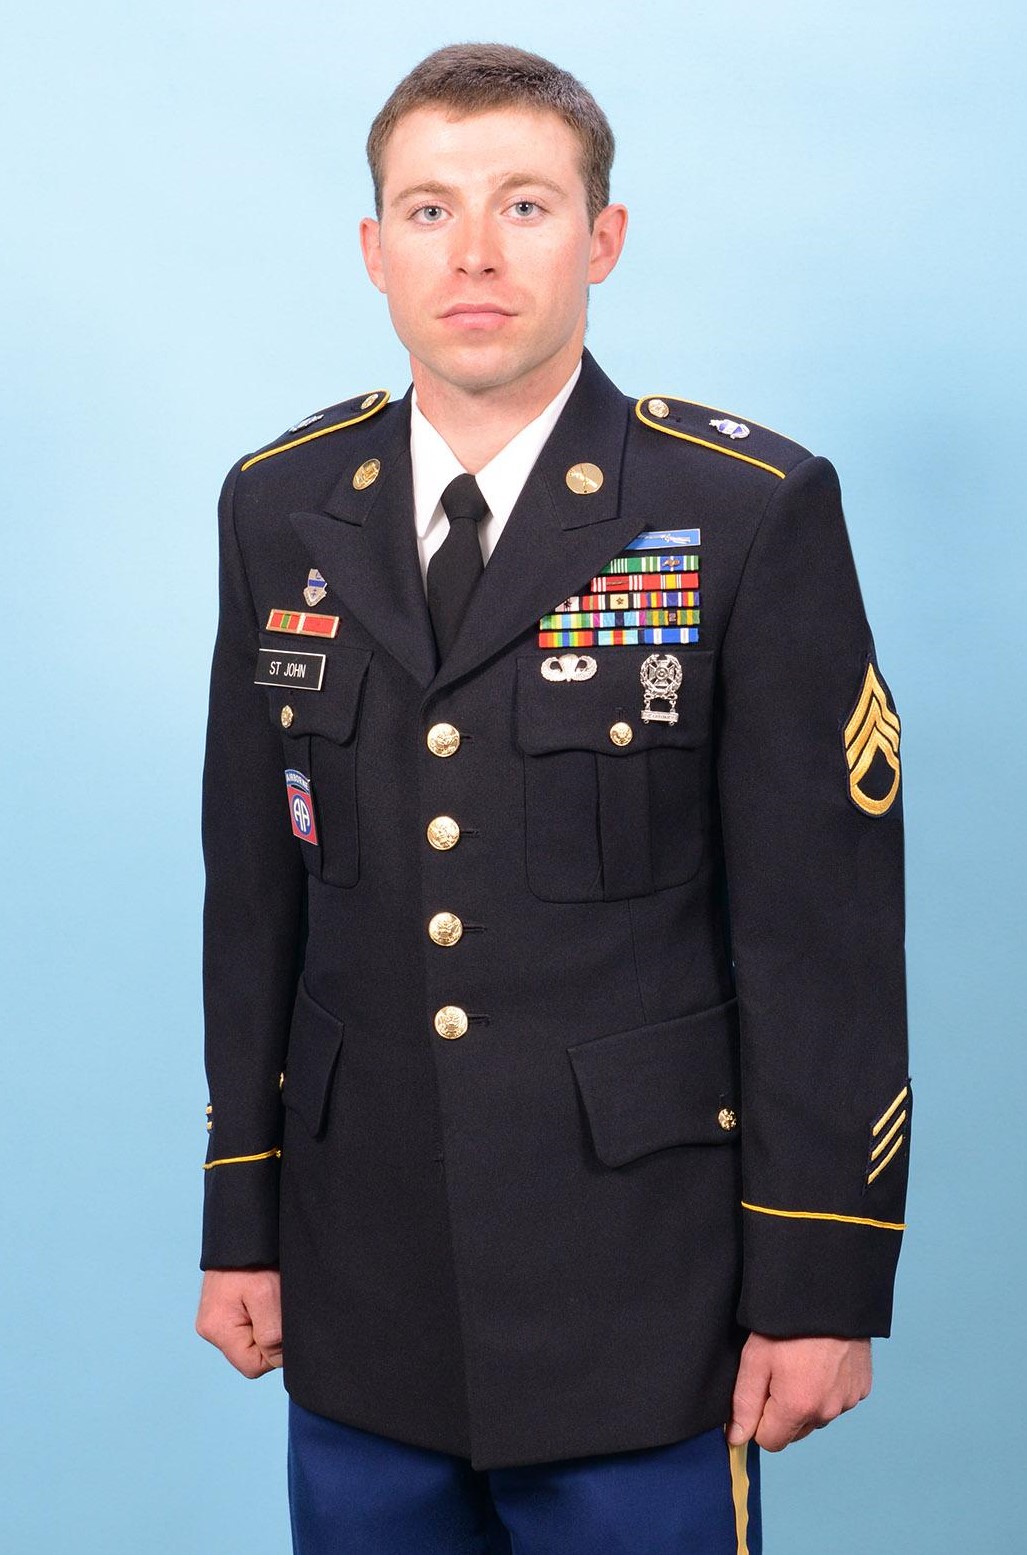 Staff Sgt. Andrew Michael St. John, 29, dies at Ft. Hood > Indiana ...